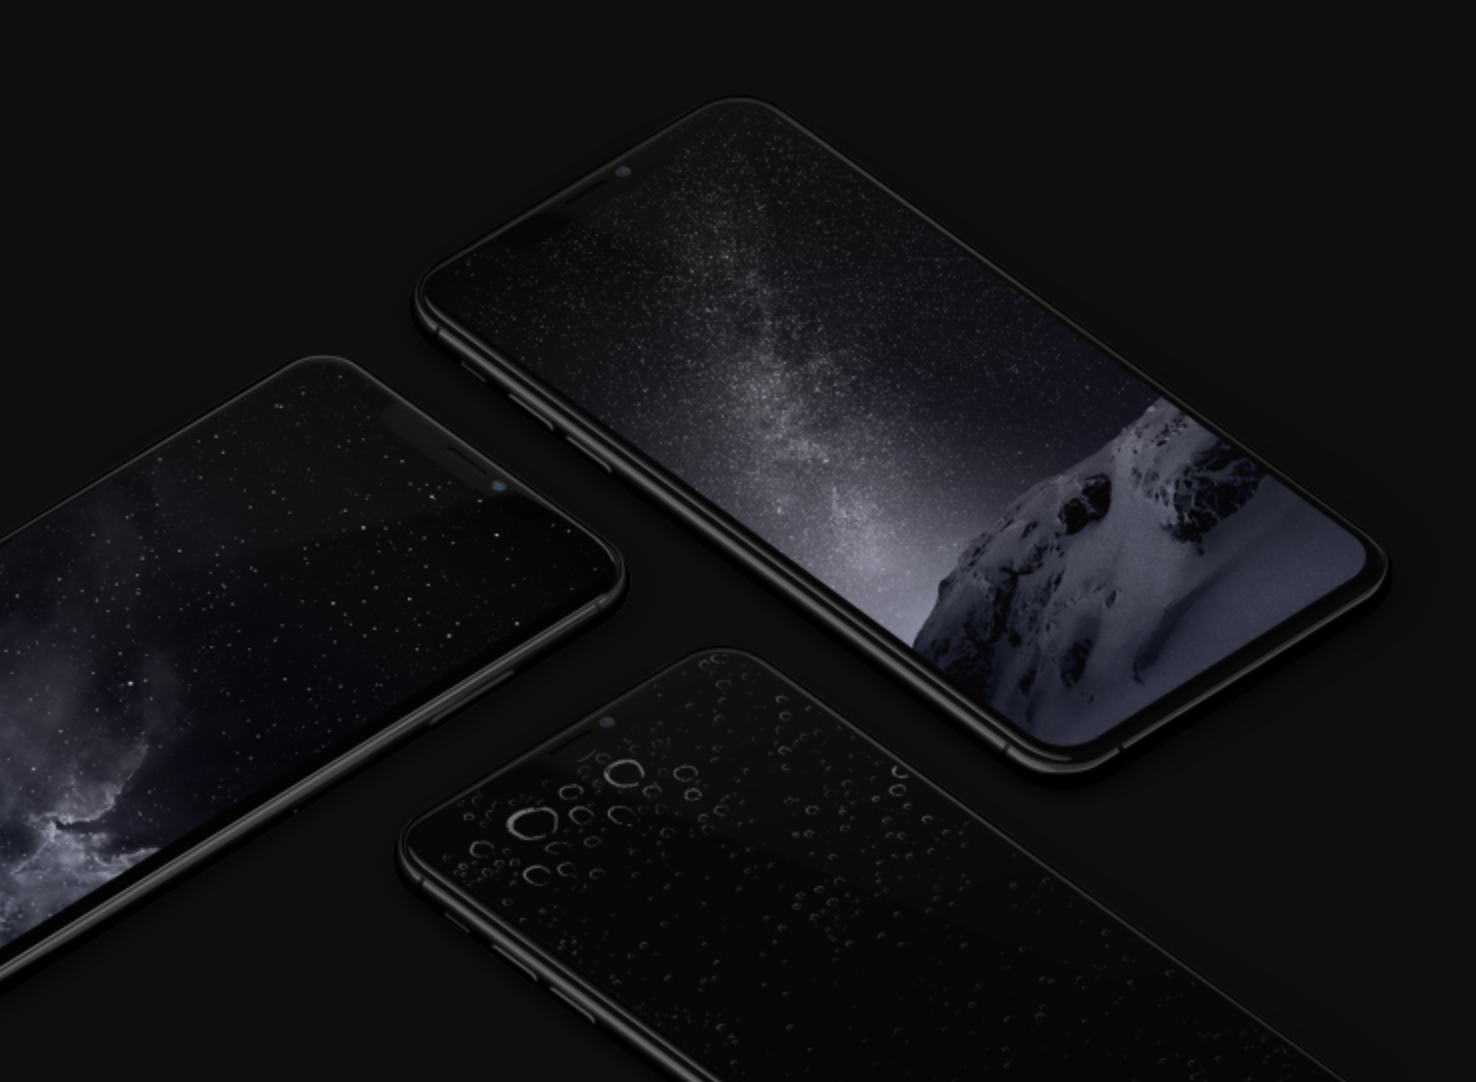 Enhance your iPhone's Dark Mode with these wallpaper